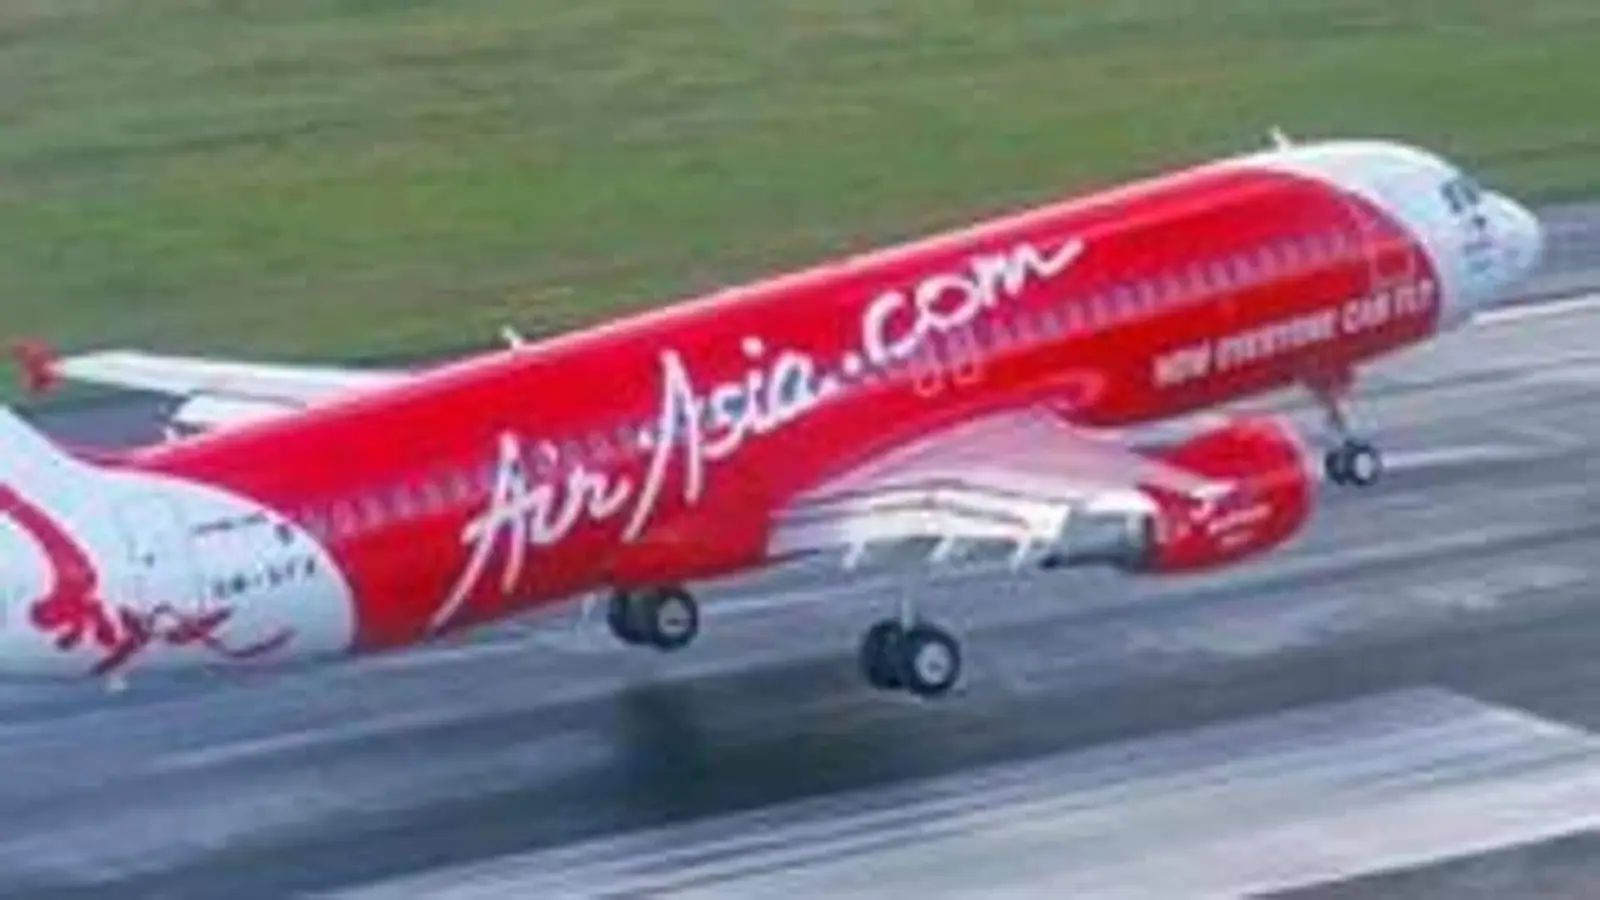 Tata-owned Air India wants to acquire AirAsia India